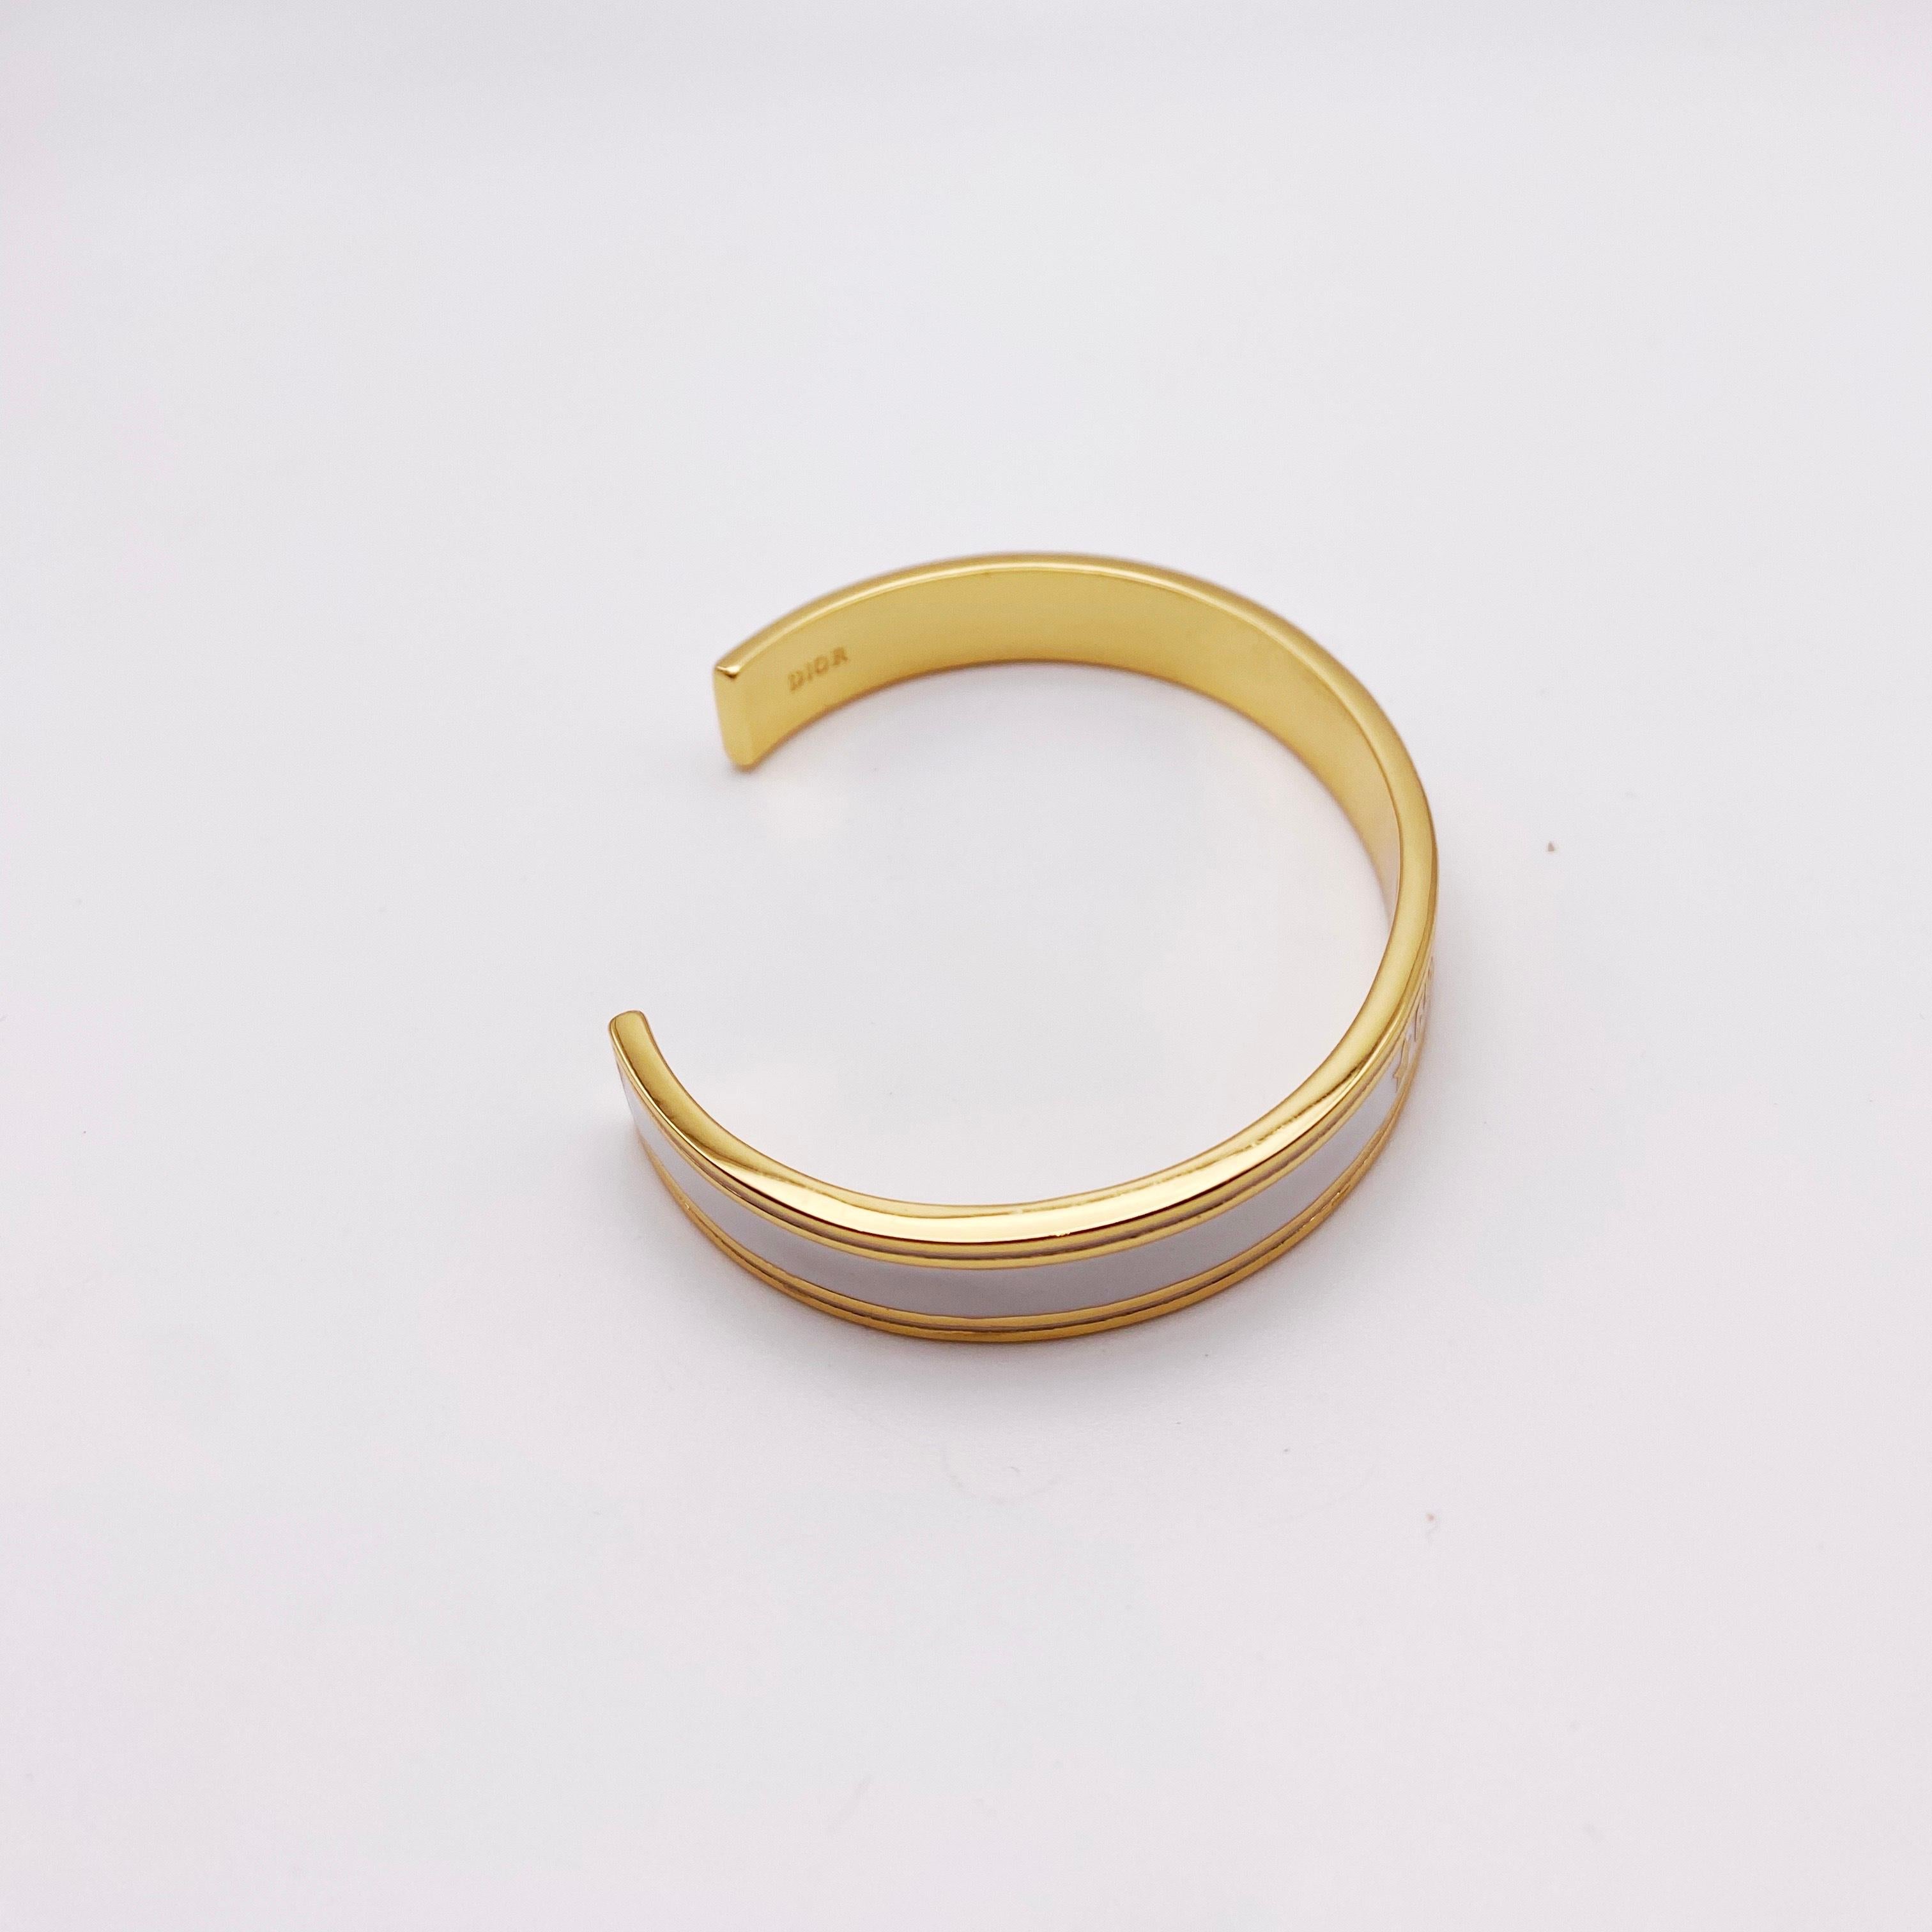 Dior Code Bangle In Good Condition For Sale In BALMAIN, AU